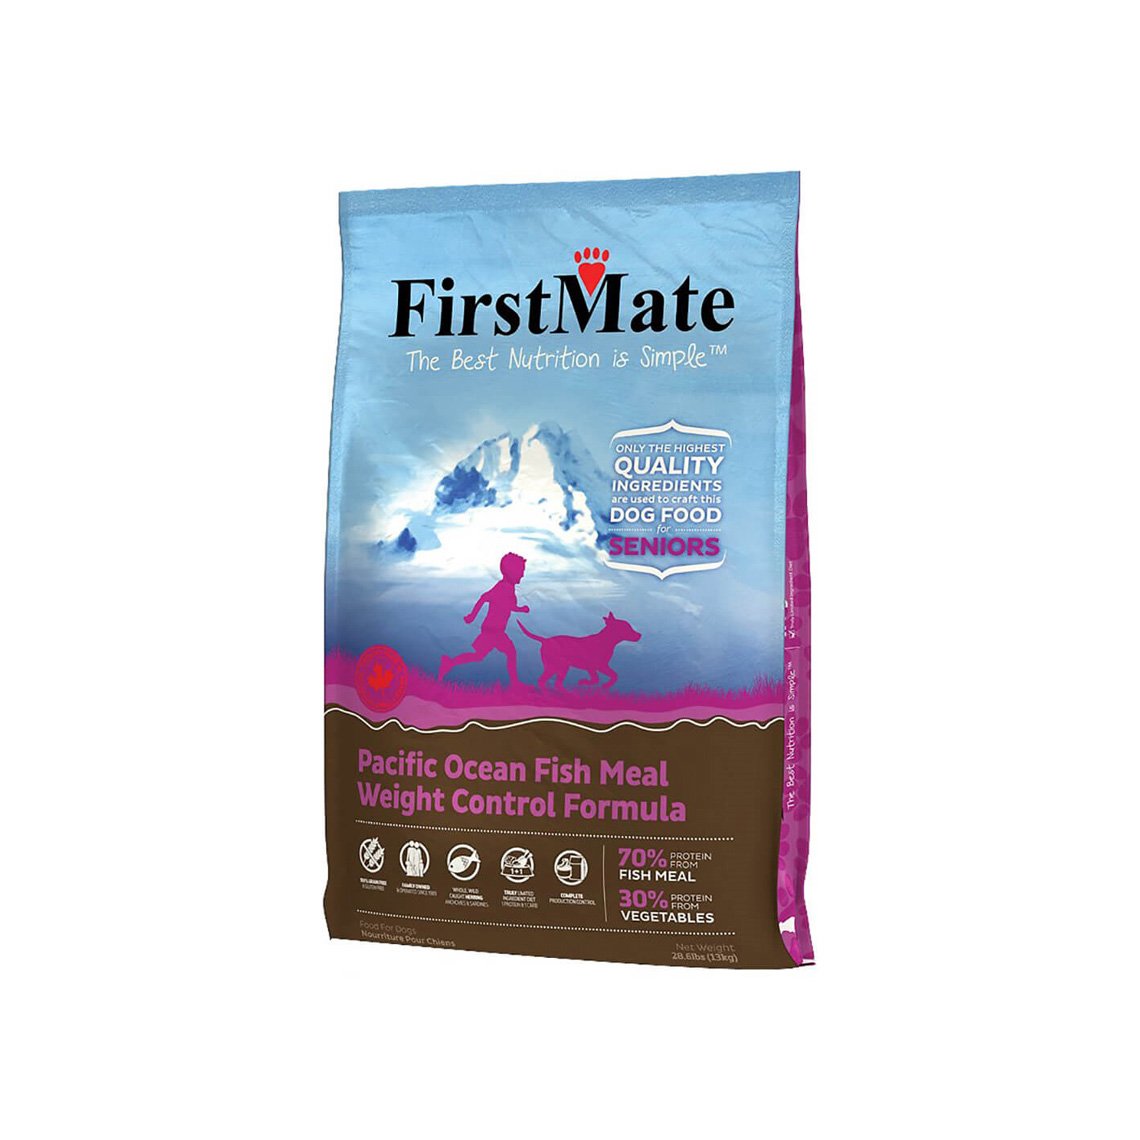 FirstMate Pacific Ocean Fish Meal Weight Control Formula Grain-Free Dry Senior Dog Food